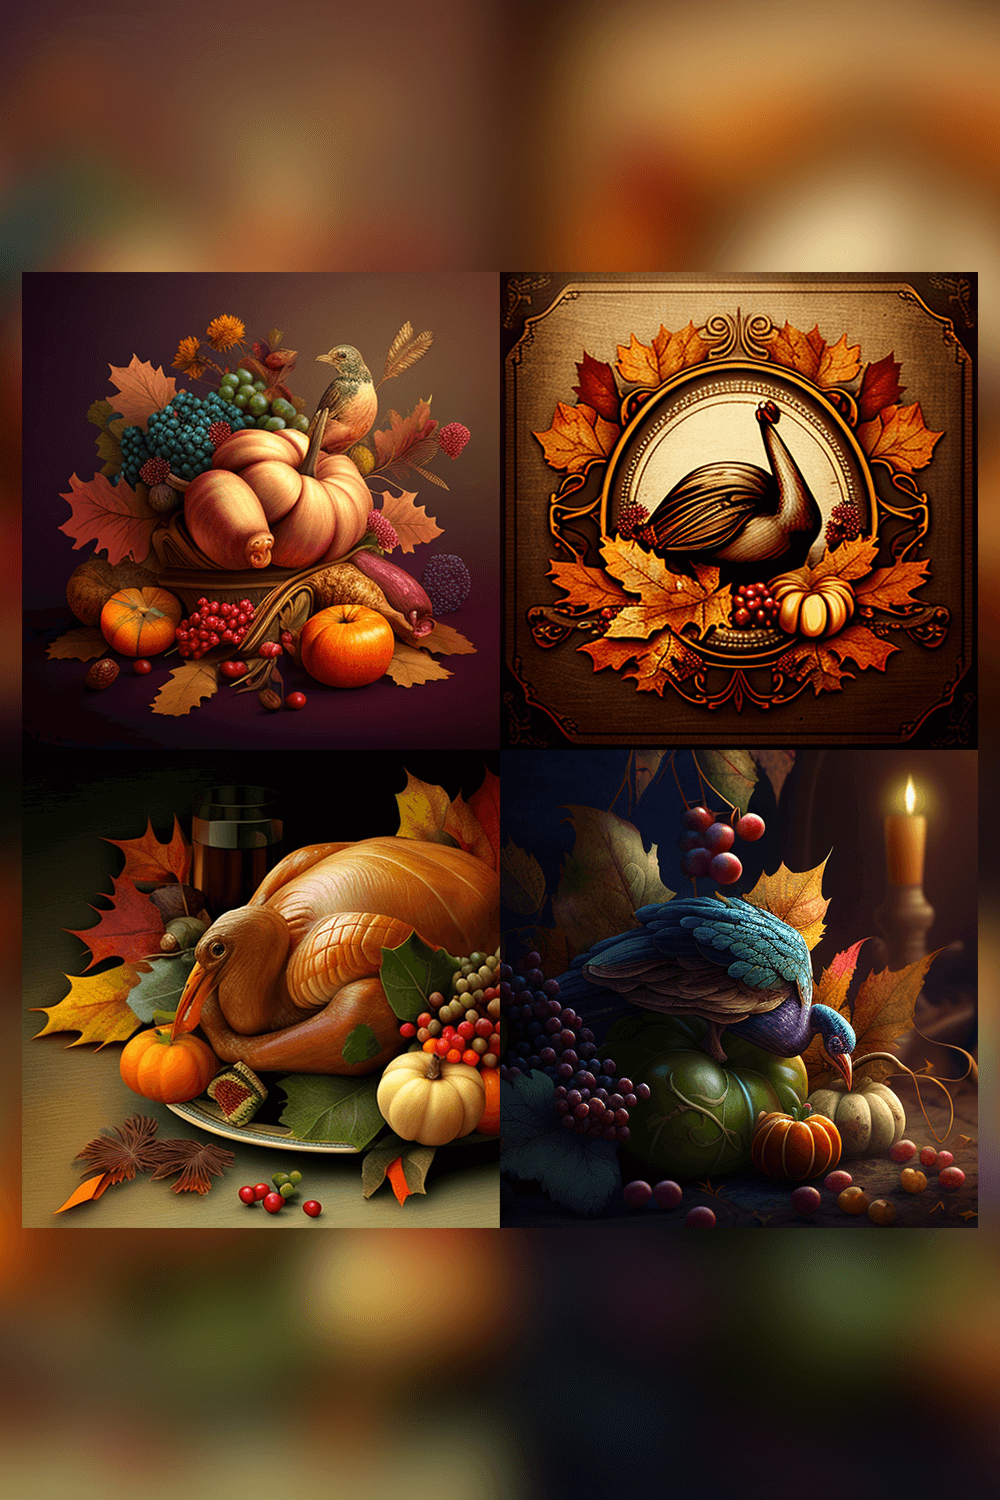 Picture of a turkey surrounded by autumn leaves and pumpkins.